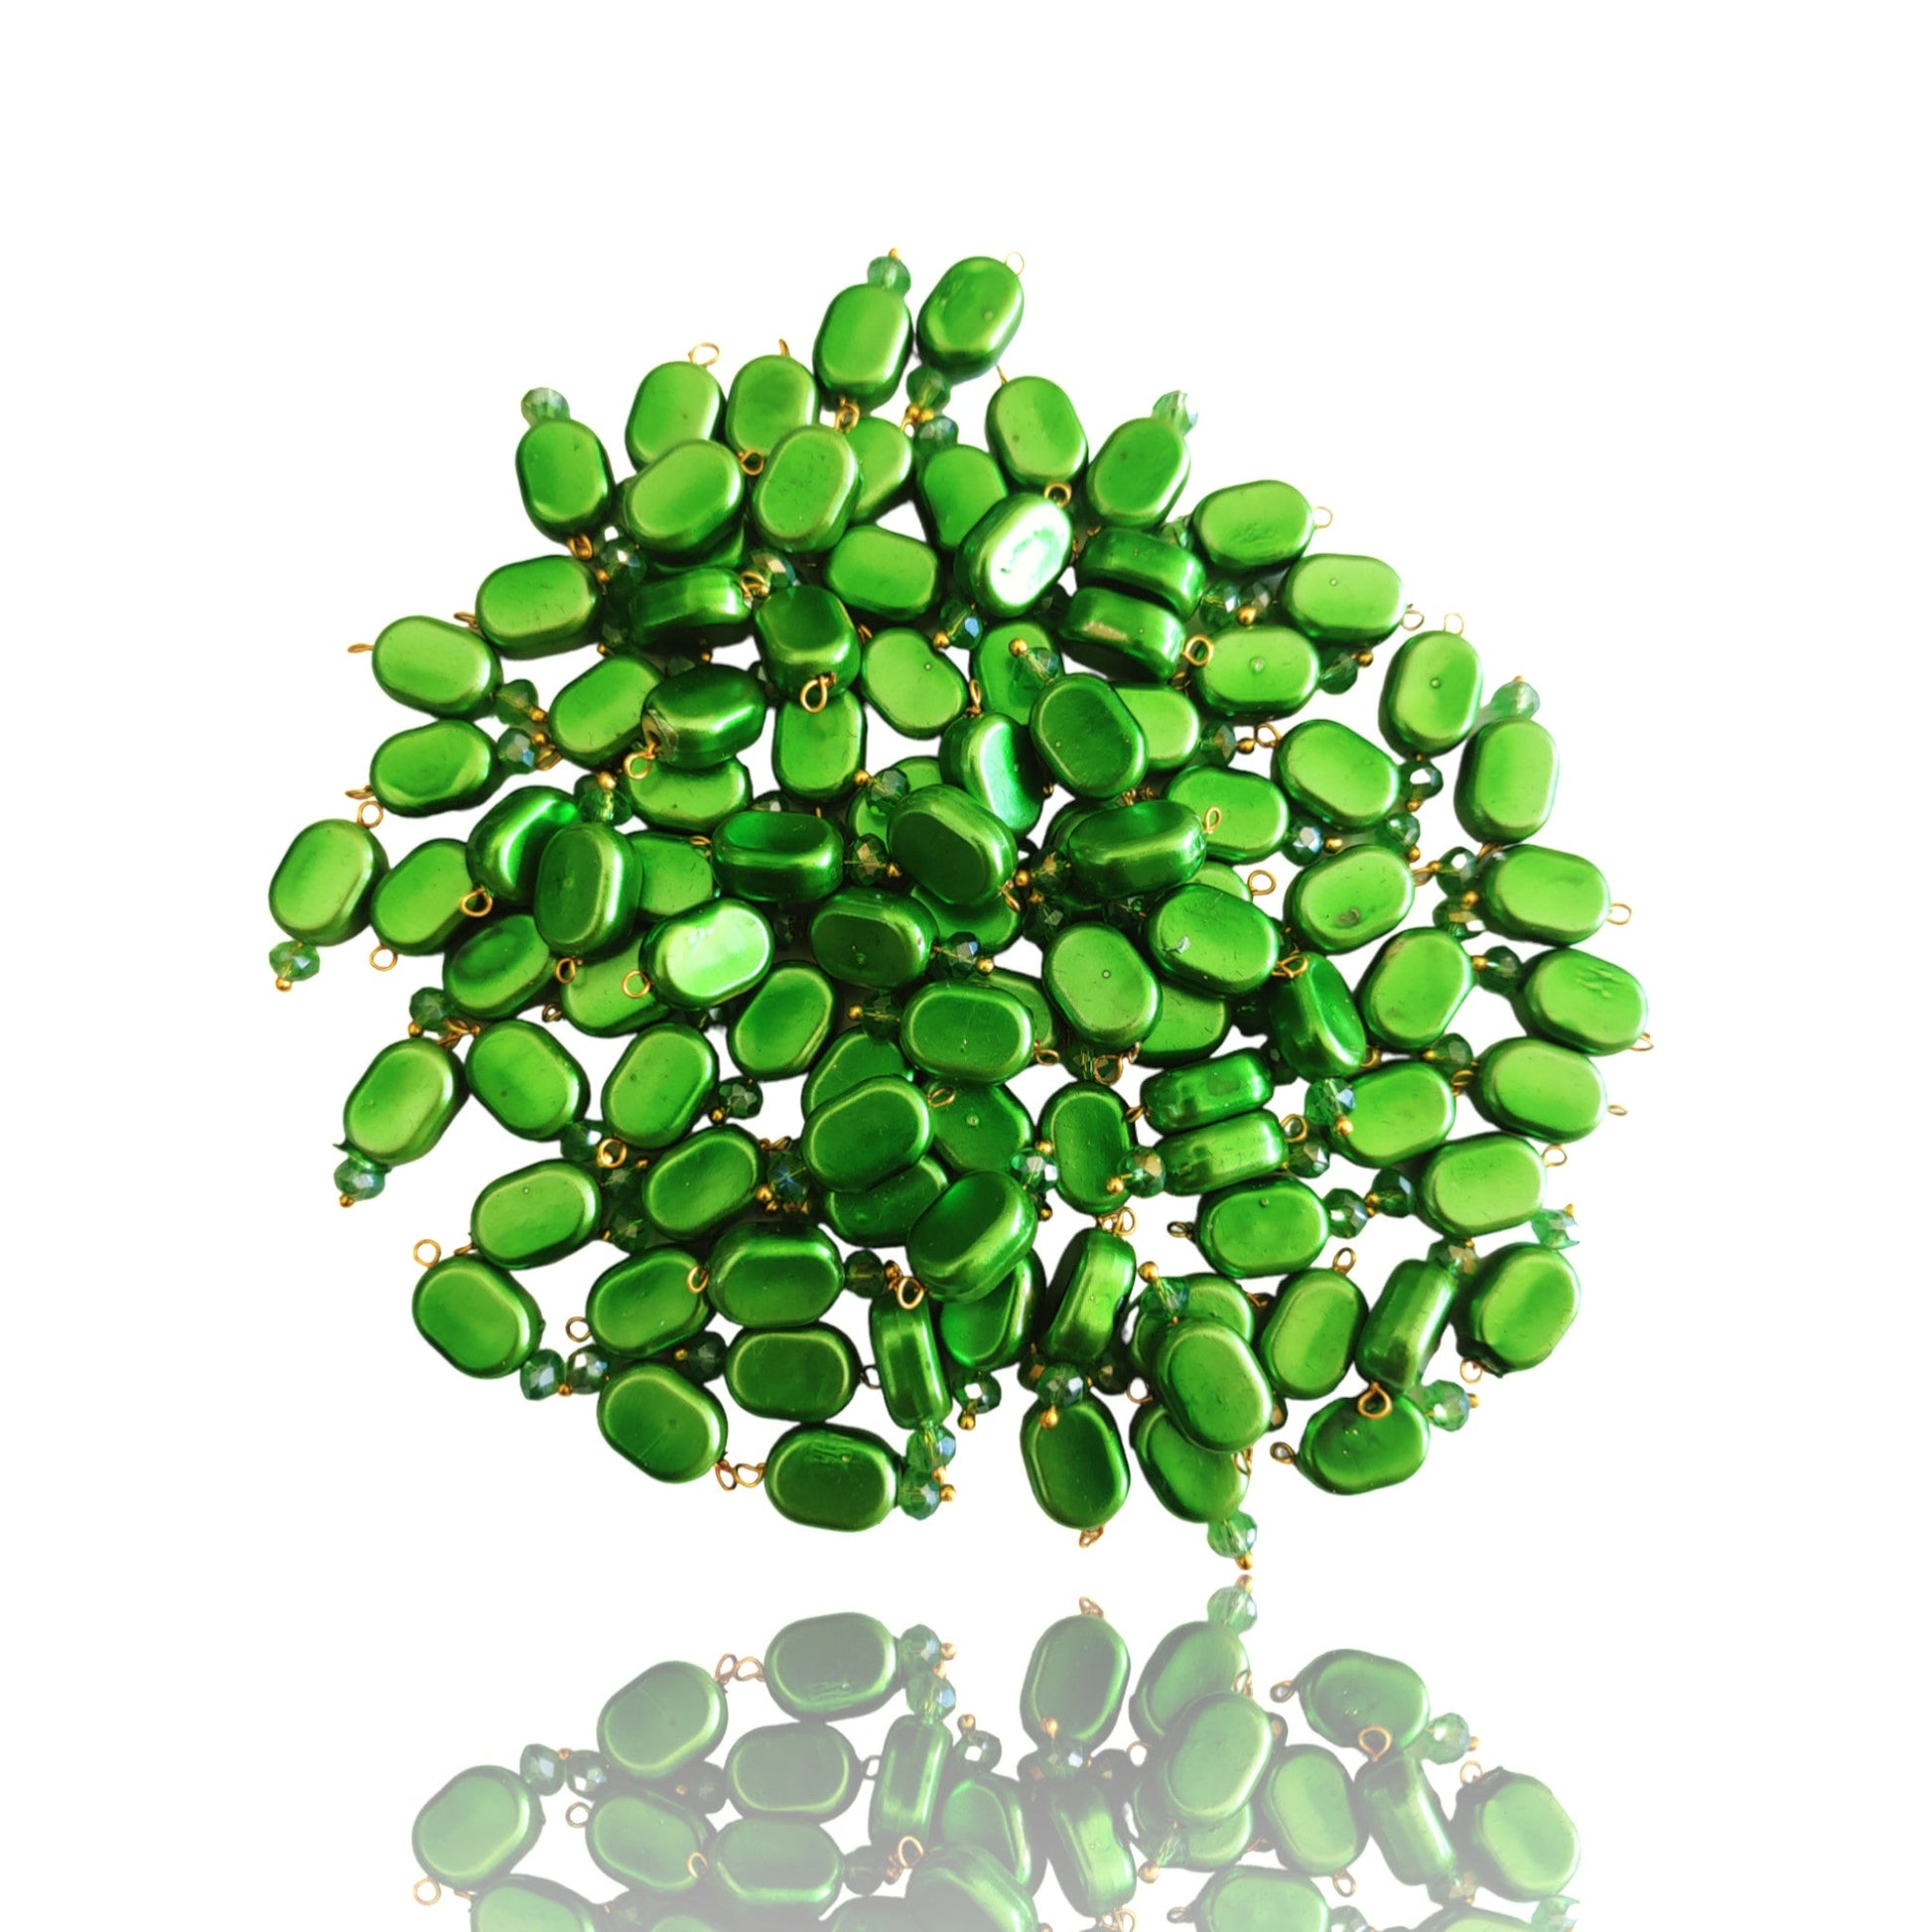 Indian Petals 100Pcs Colored Plastic Bead with Crystal Ball Drop for Craft Décor or Jewelry Making, 8x12mm, Green